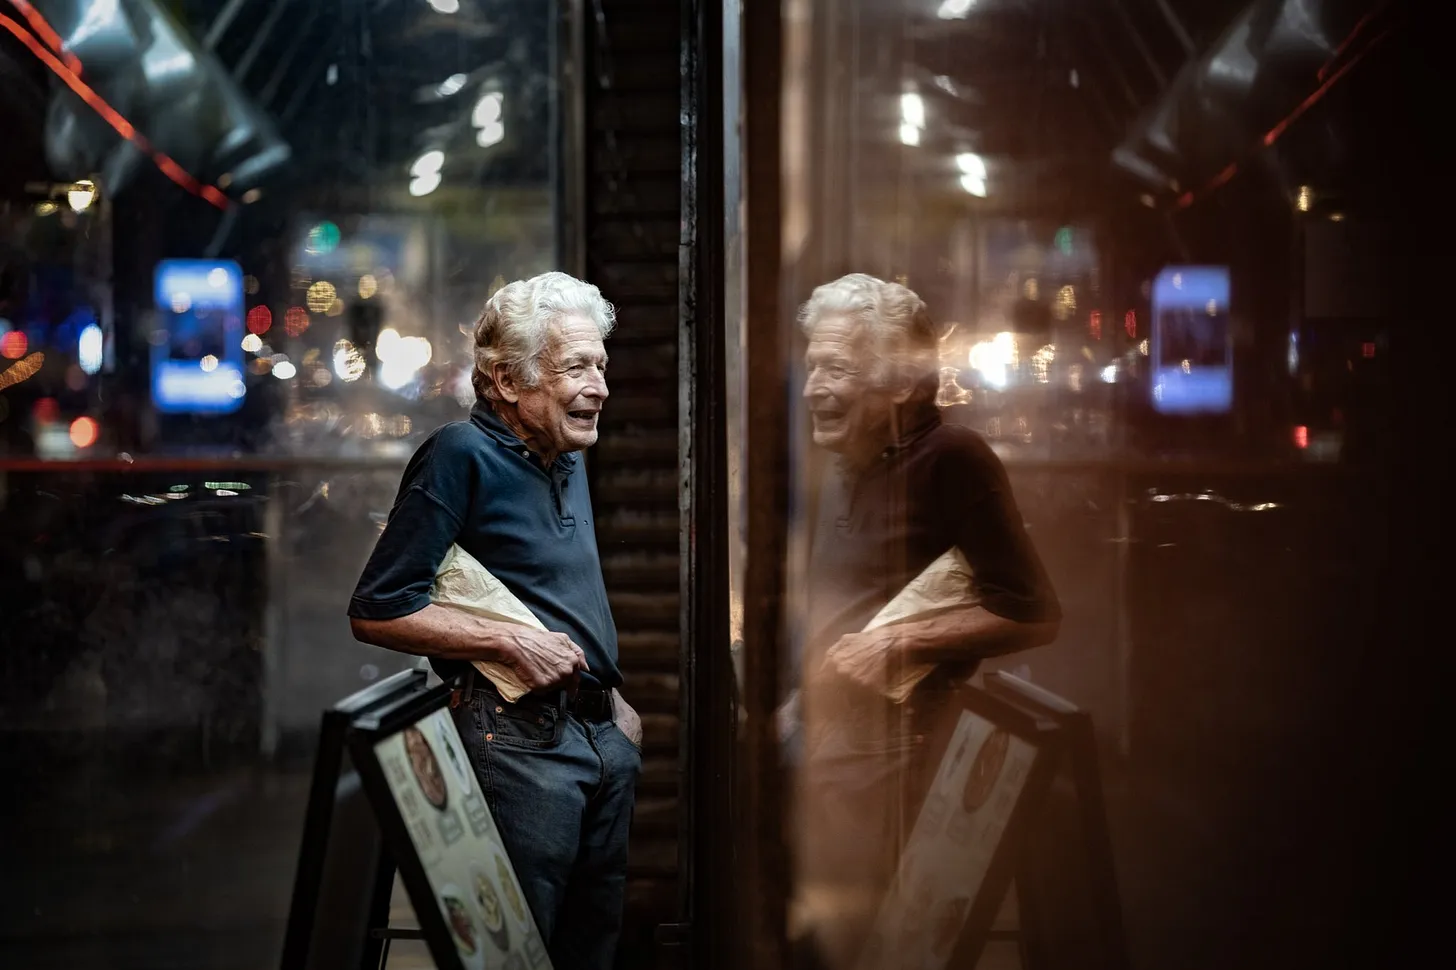 Photo of a man laughing into his reflection in a shop window at night.